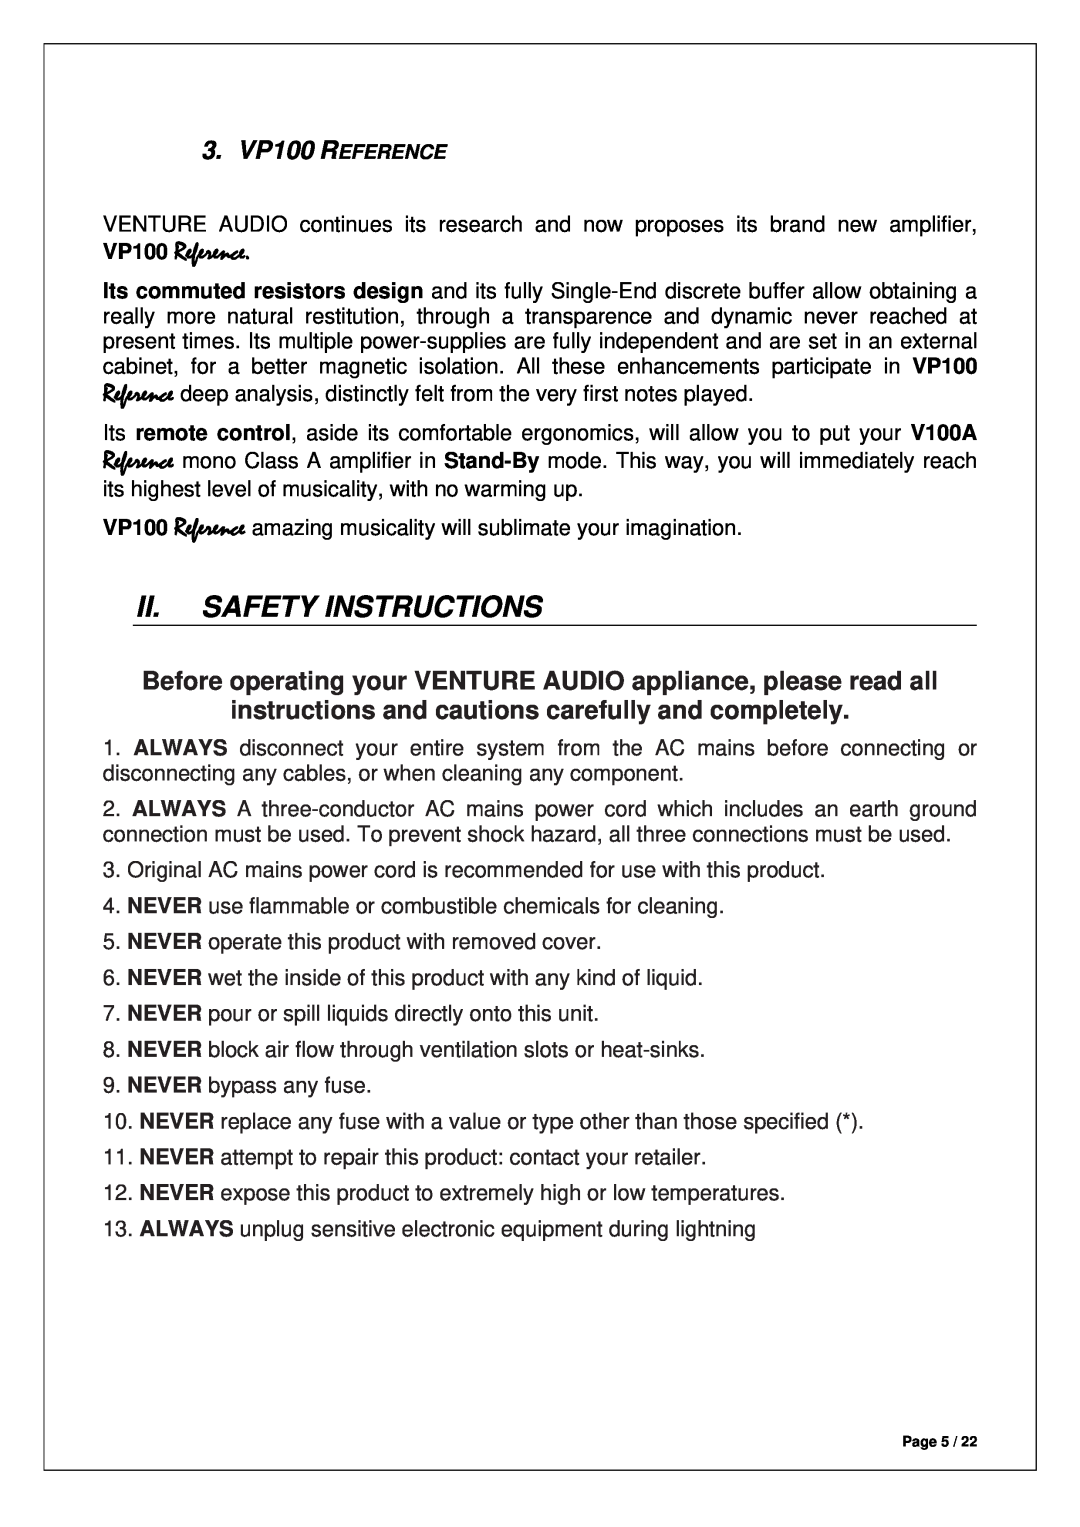 Venture Products manual Ii.Safety Instructions, VP100 Reference 